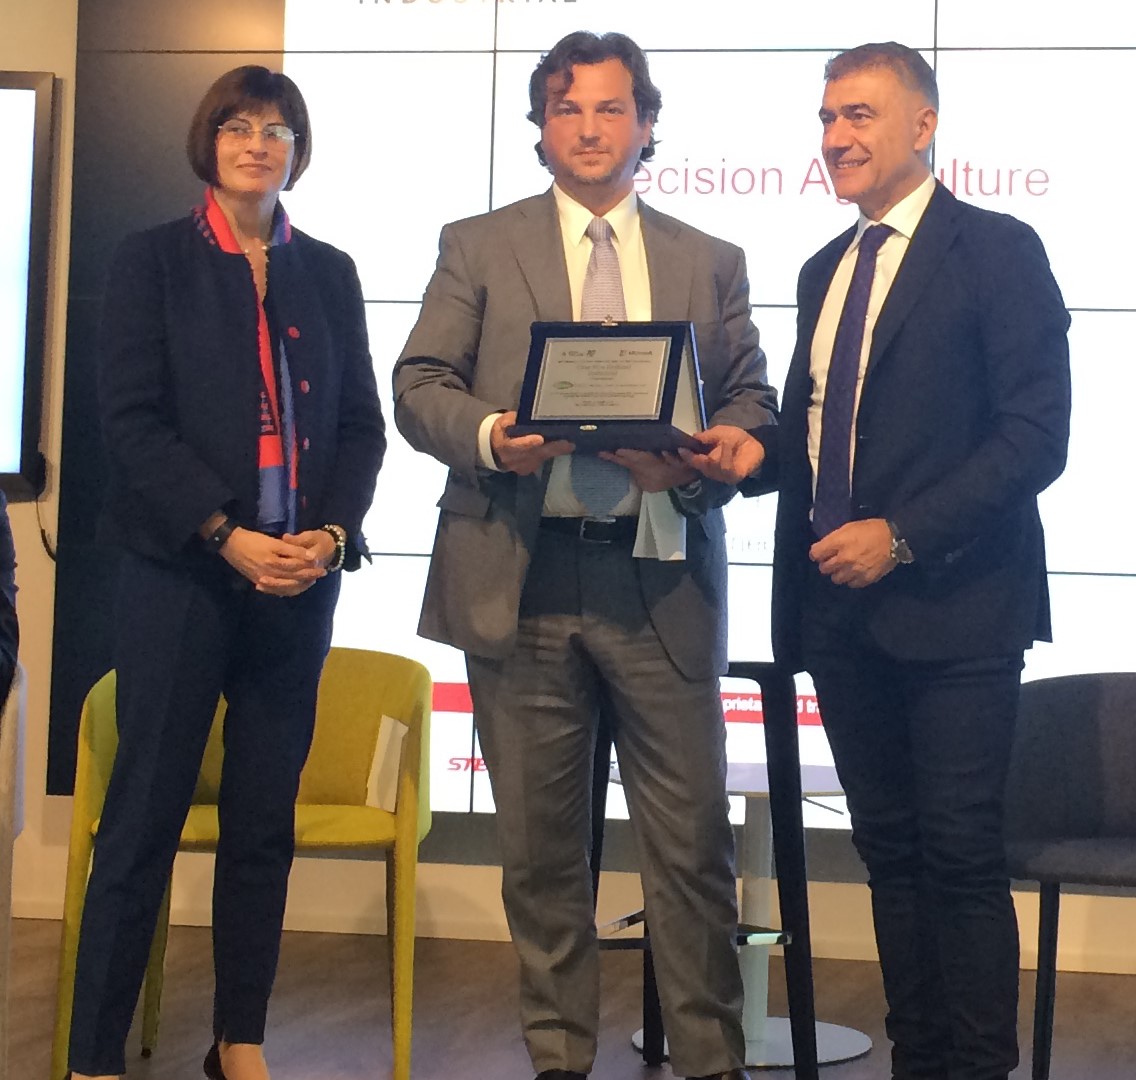 Antonio Marzia, Head of Connected Services at CNH Industrial collecting the “Green Pride of Innovation" award